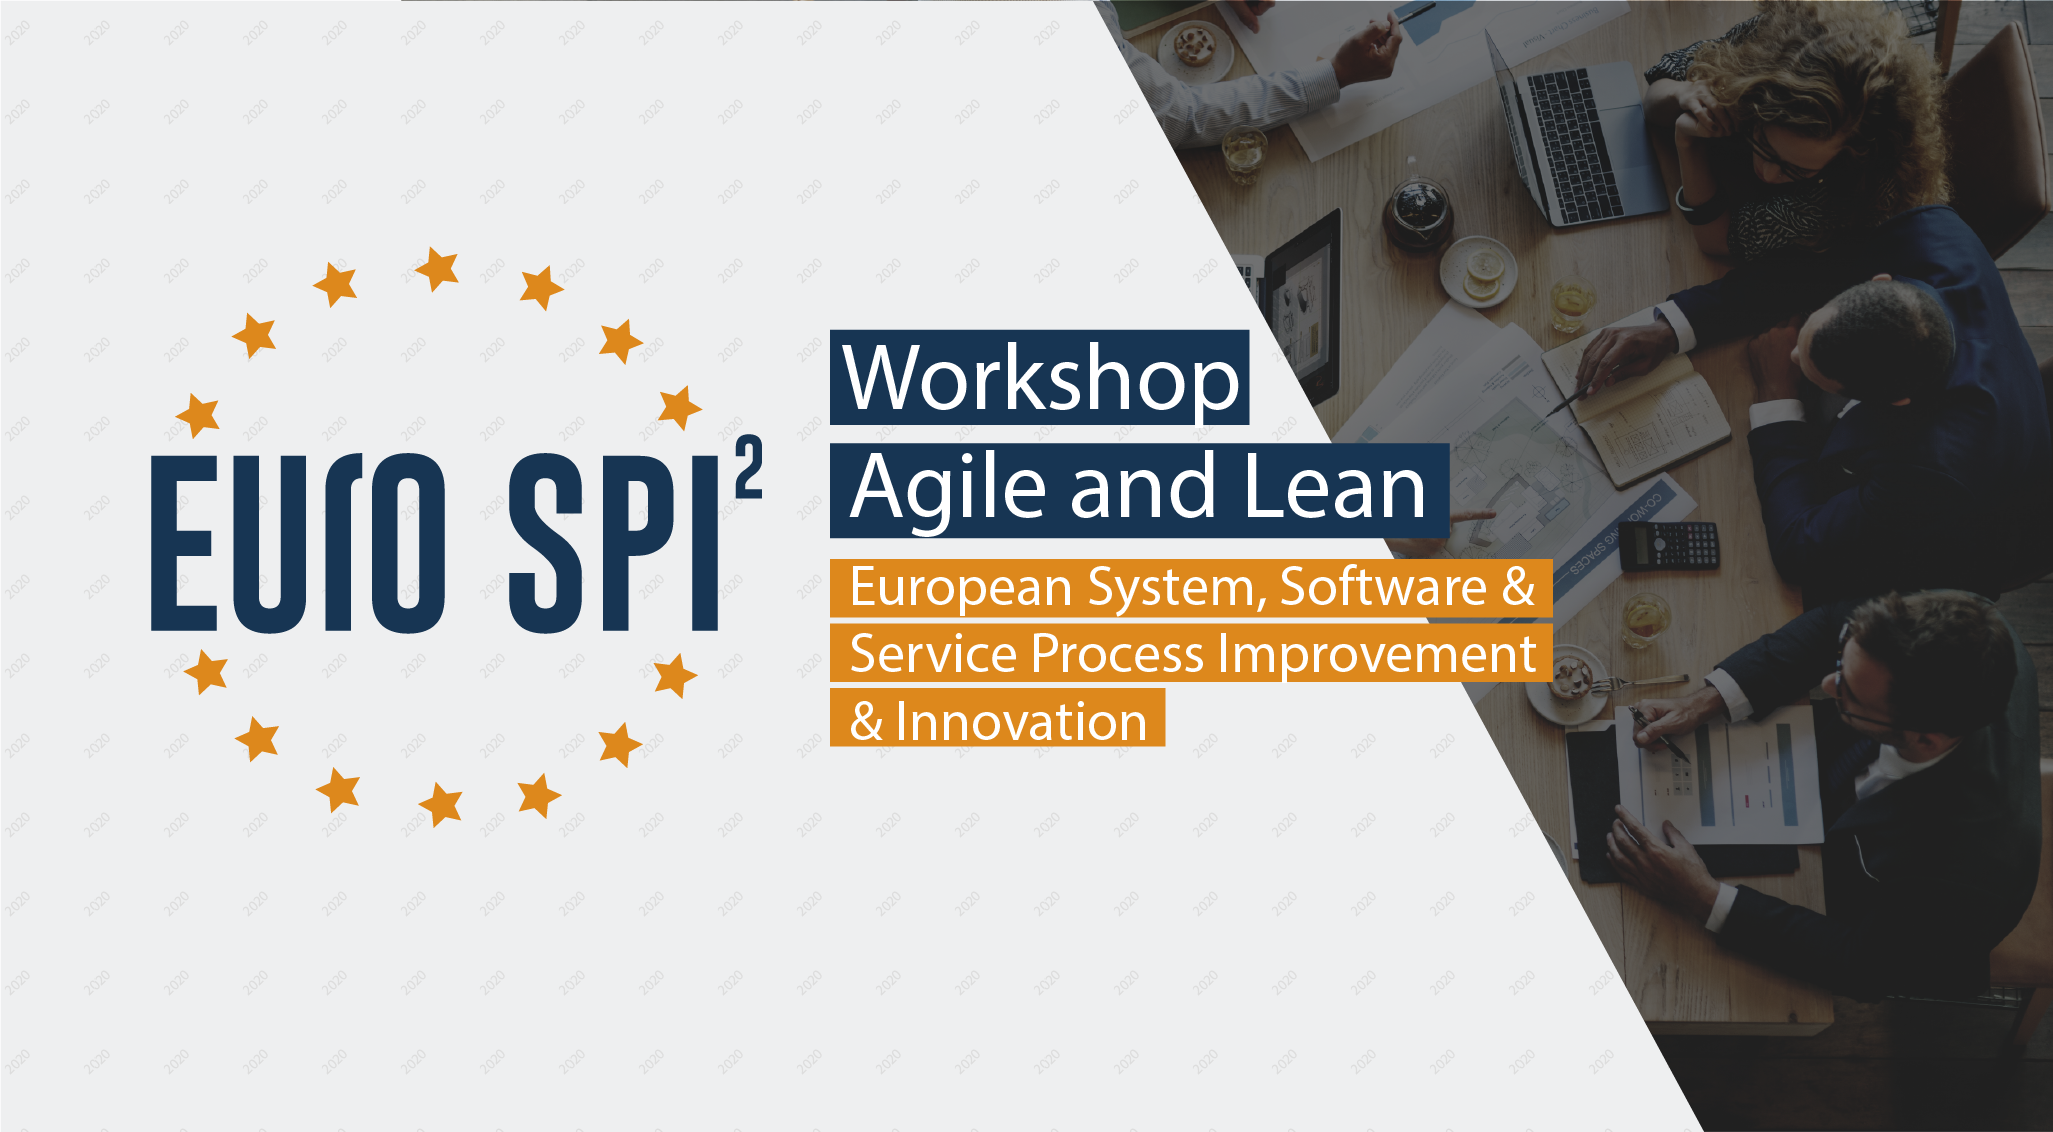 Experiences with Agile and Lean